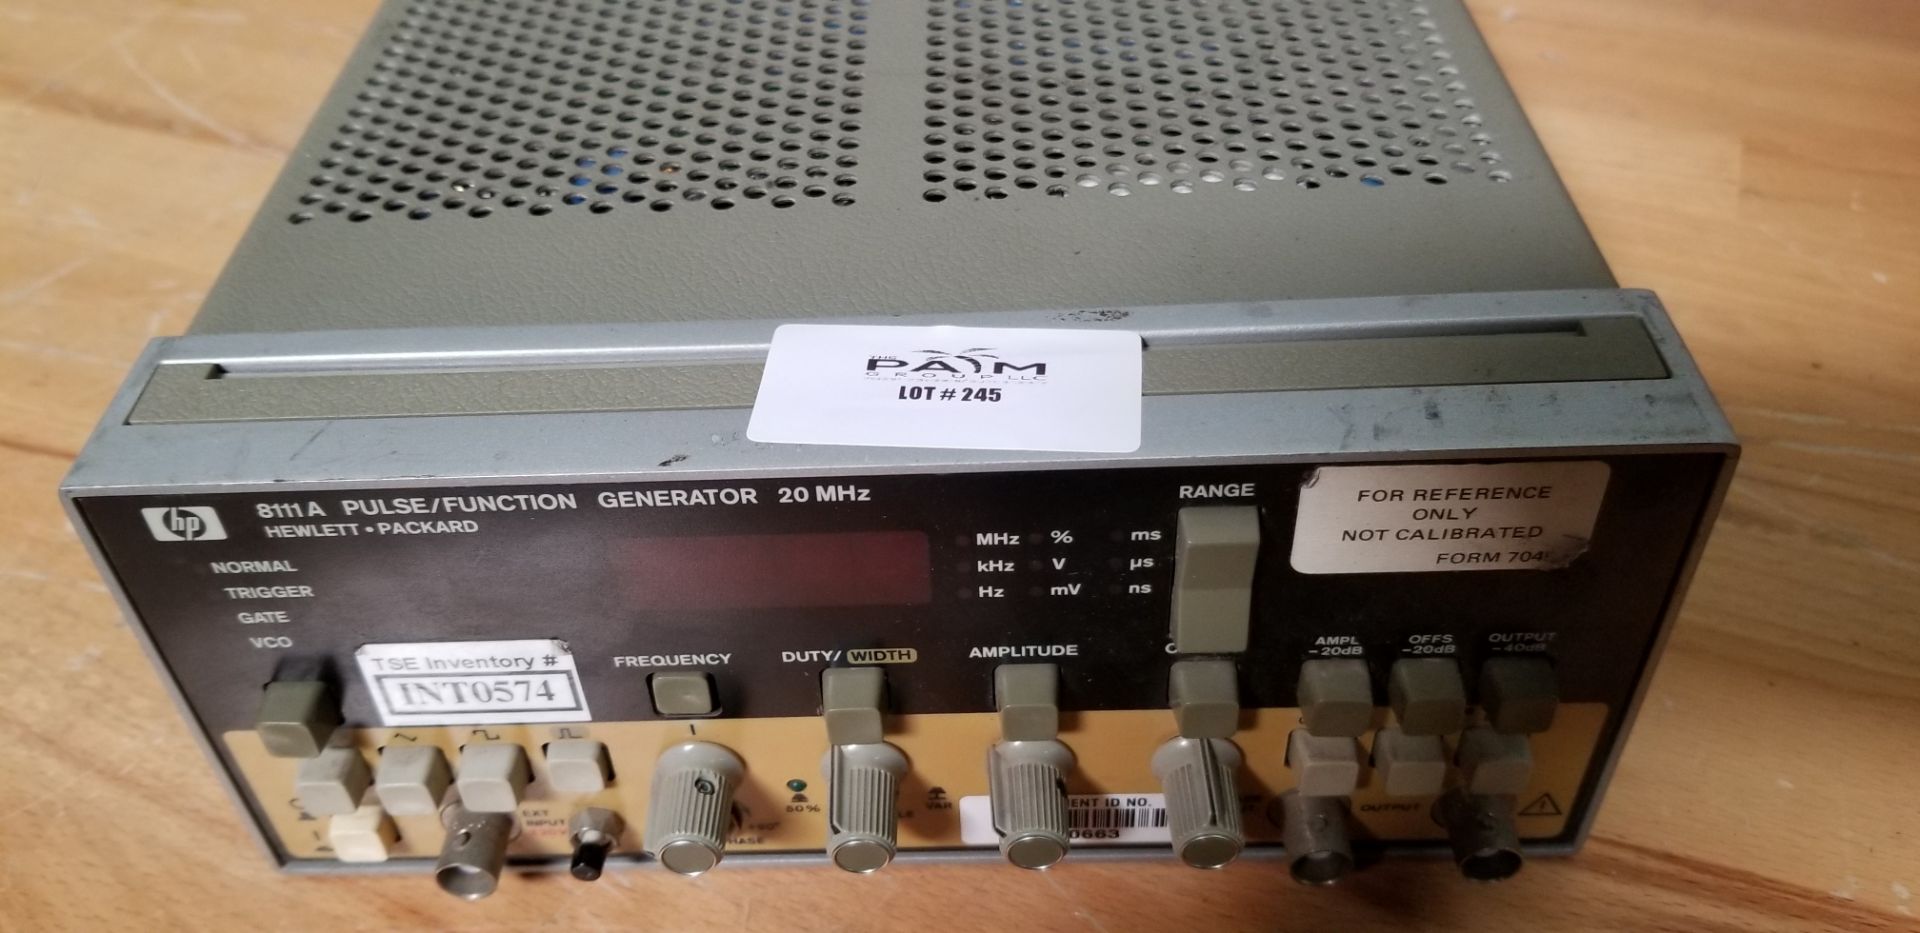 HP 8111A Pulse/Function Generator - Image 2 of 4